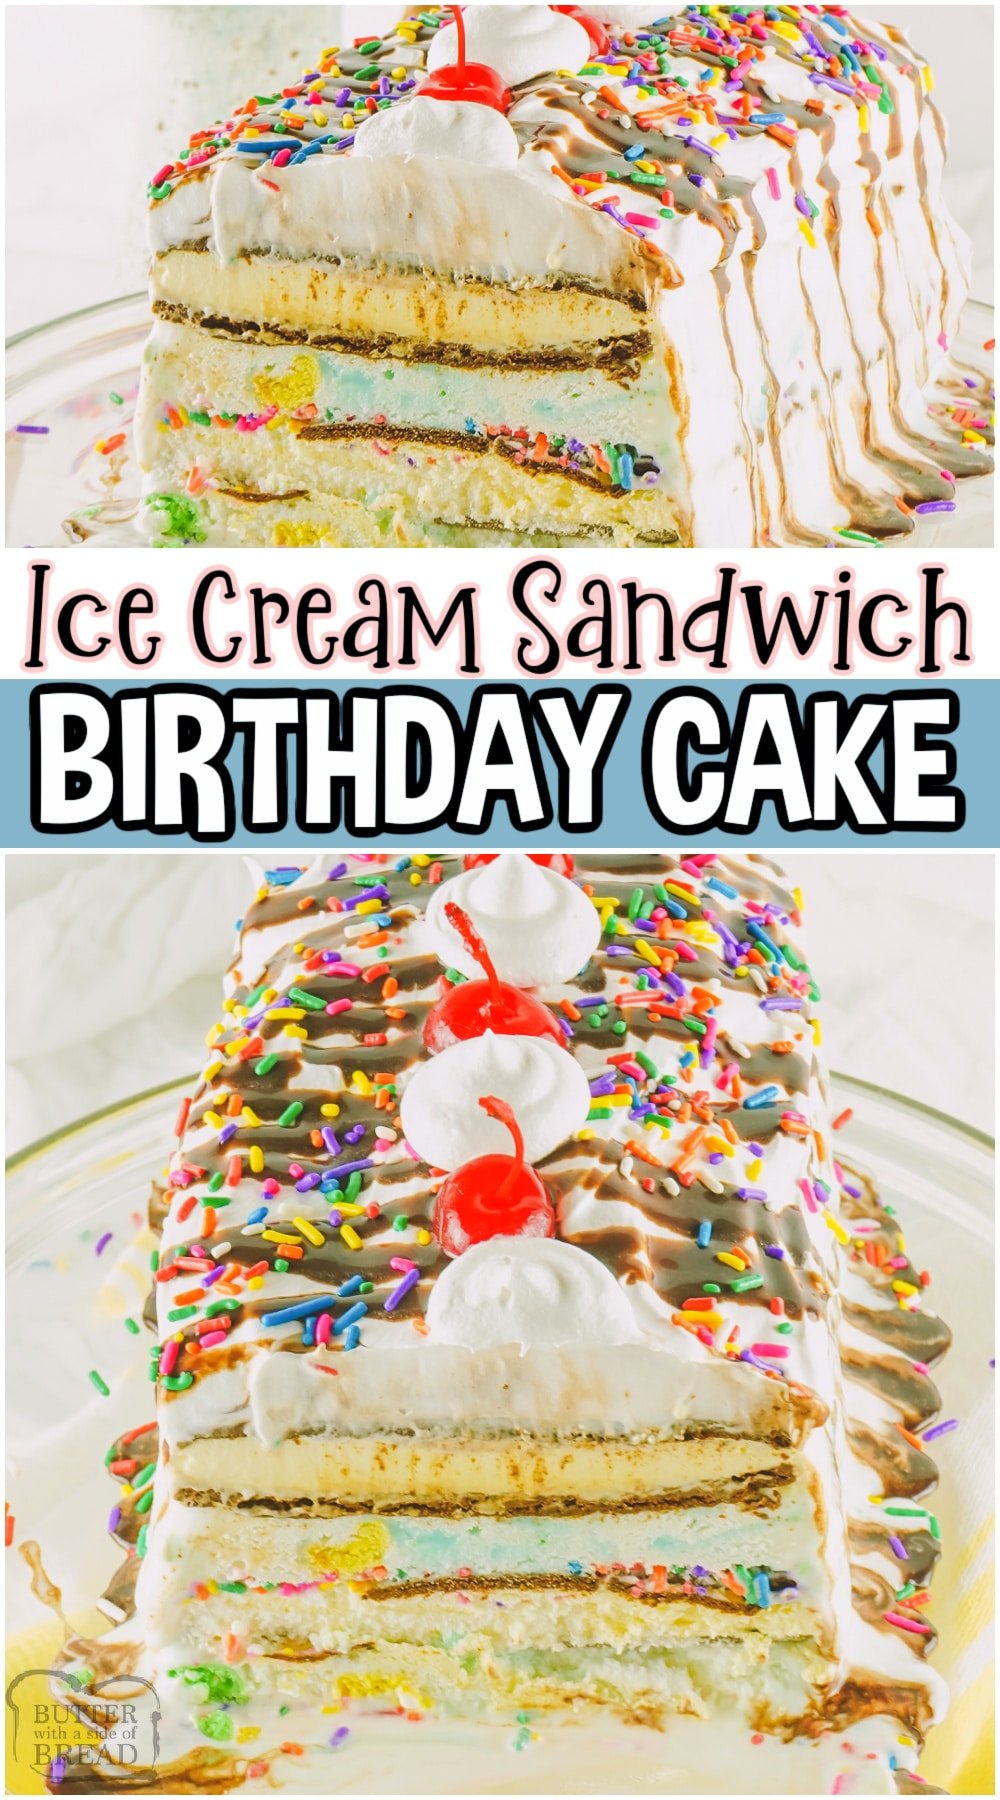 Easy Ice Cream Sandwich Cake perfect for birthdays, holidays or any celebration! Quick & simple recipe using ice cream sandwiches & birthday cake ice cream, as well as whipped cream, sprinkles, cherries & chocolate syrup.